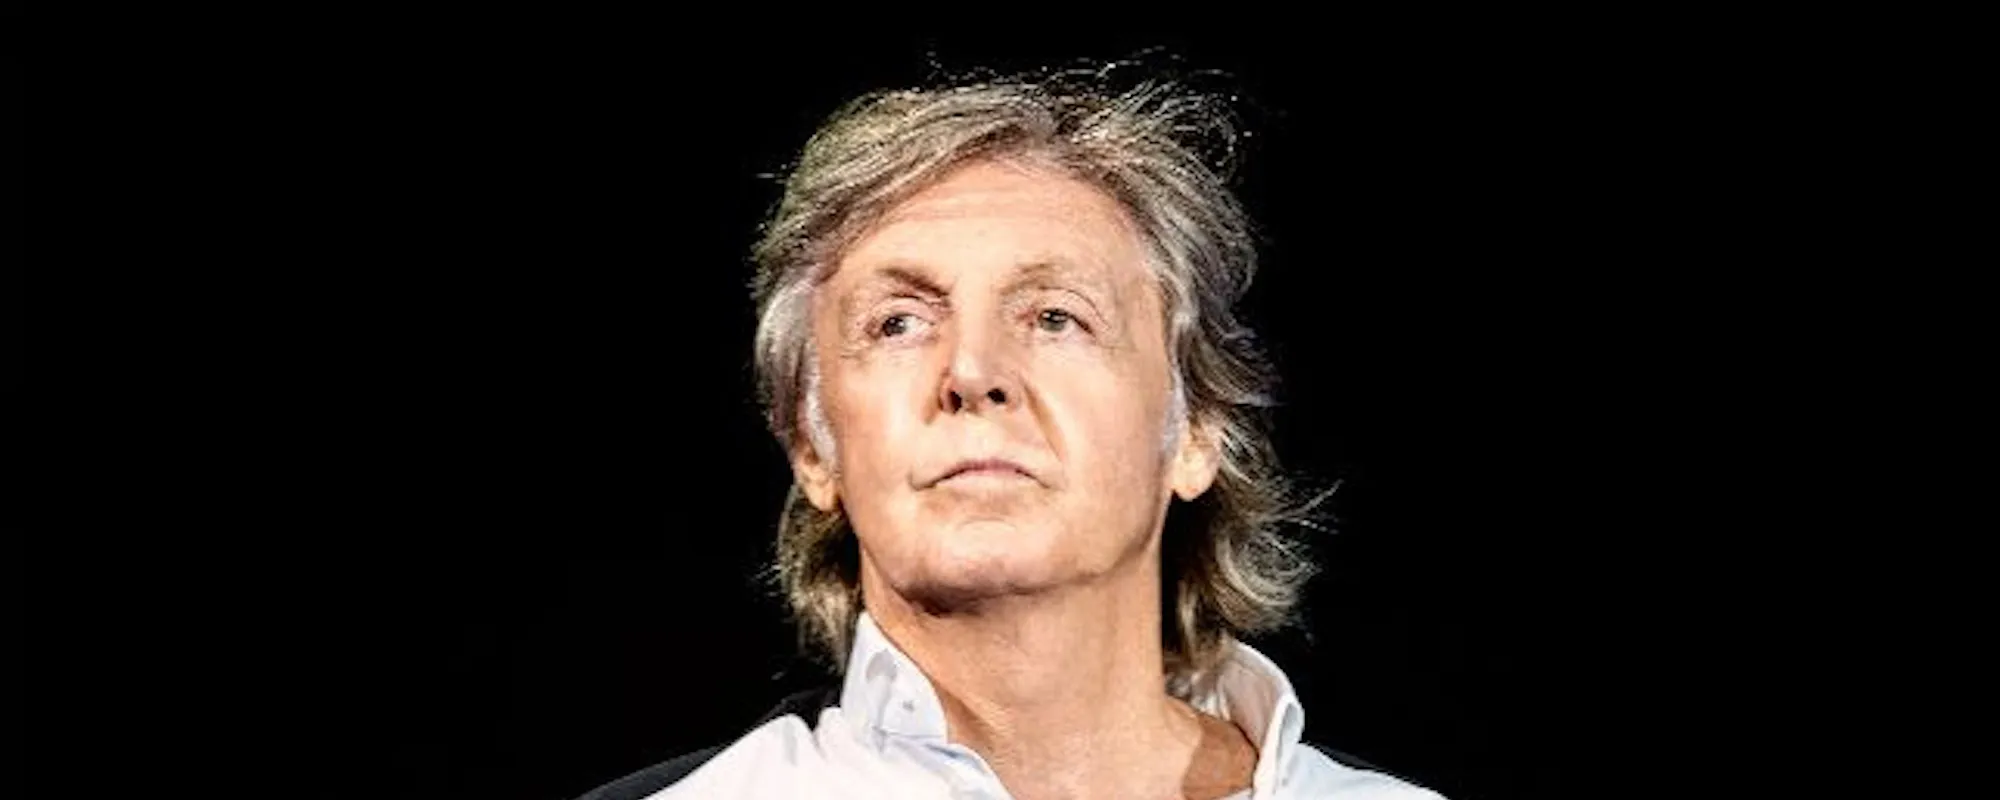 Paul McCartney Recalls Time with Taylor Hawkins: “You Were a True Rock and Roll Hero”